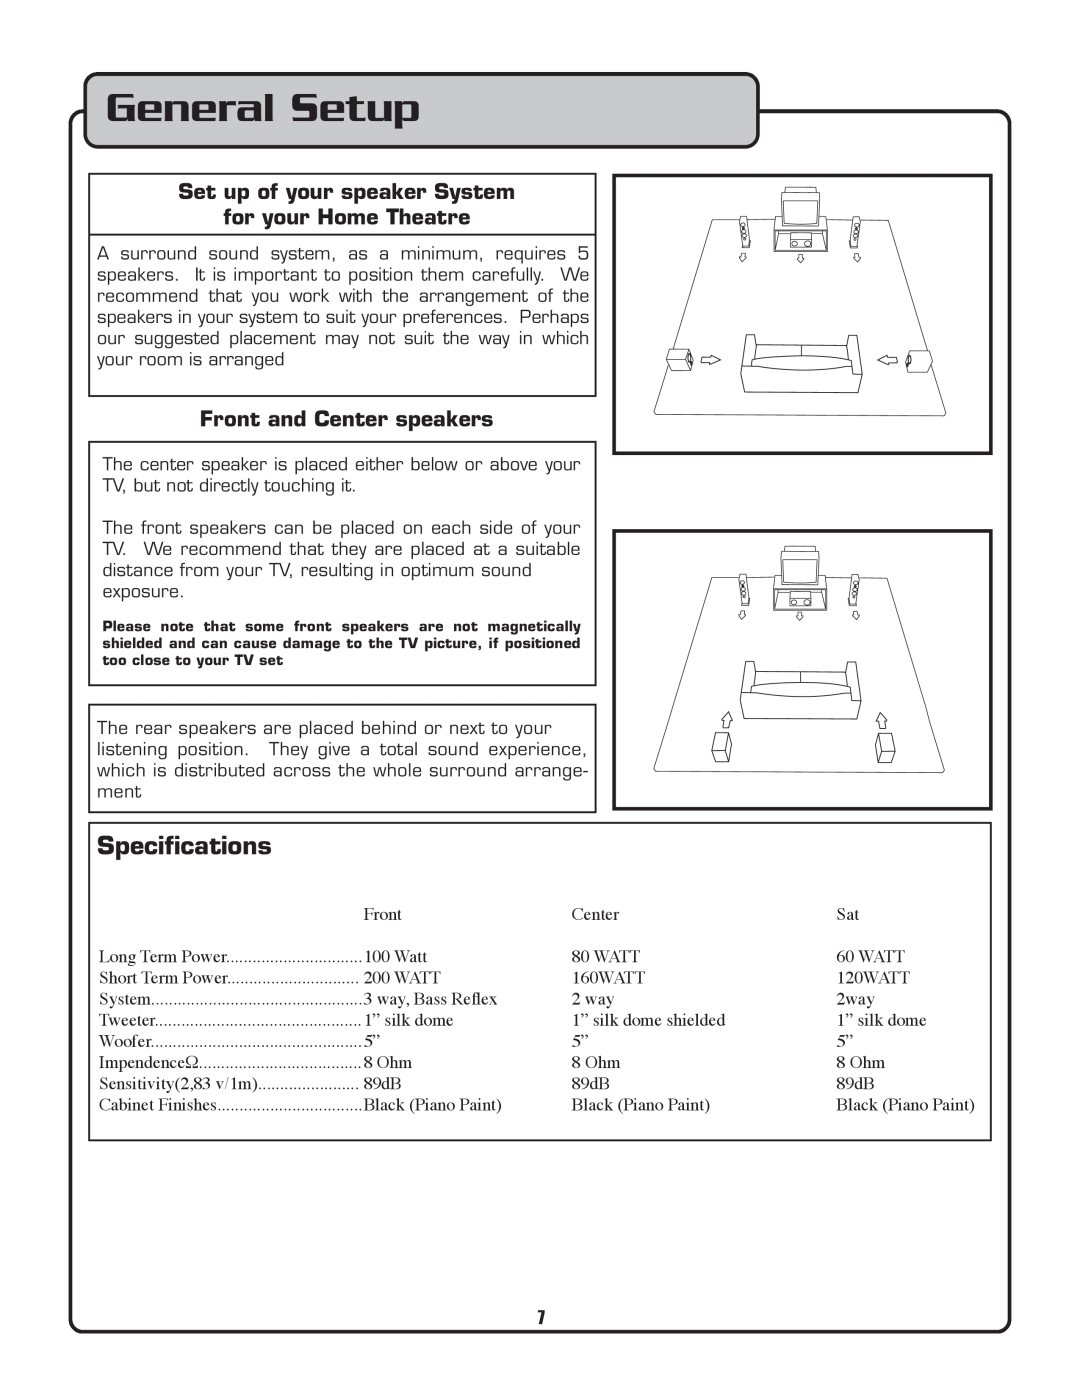 VocoPro PIANO-5 owner manual General Setup, Speciﬁcations, Set up of your speaker System, for your Home Theatre 